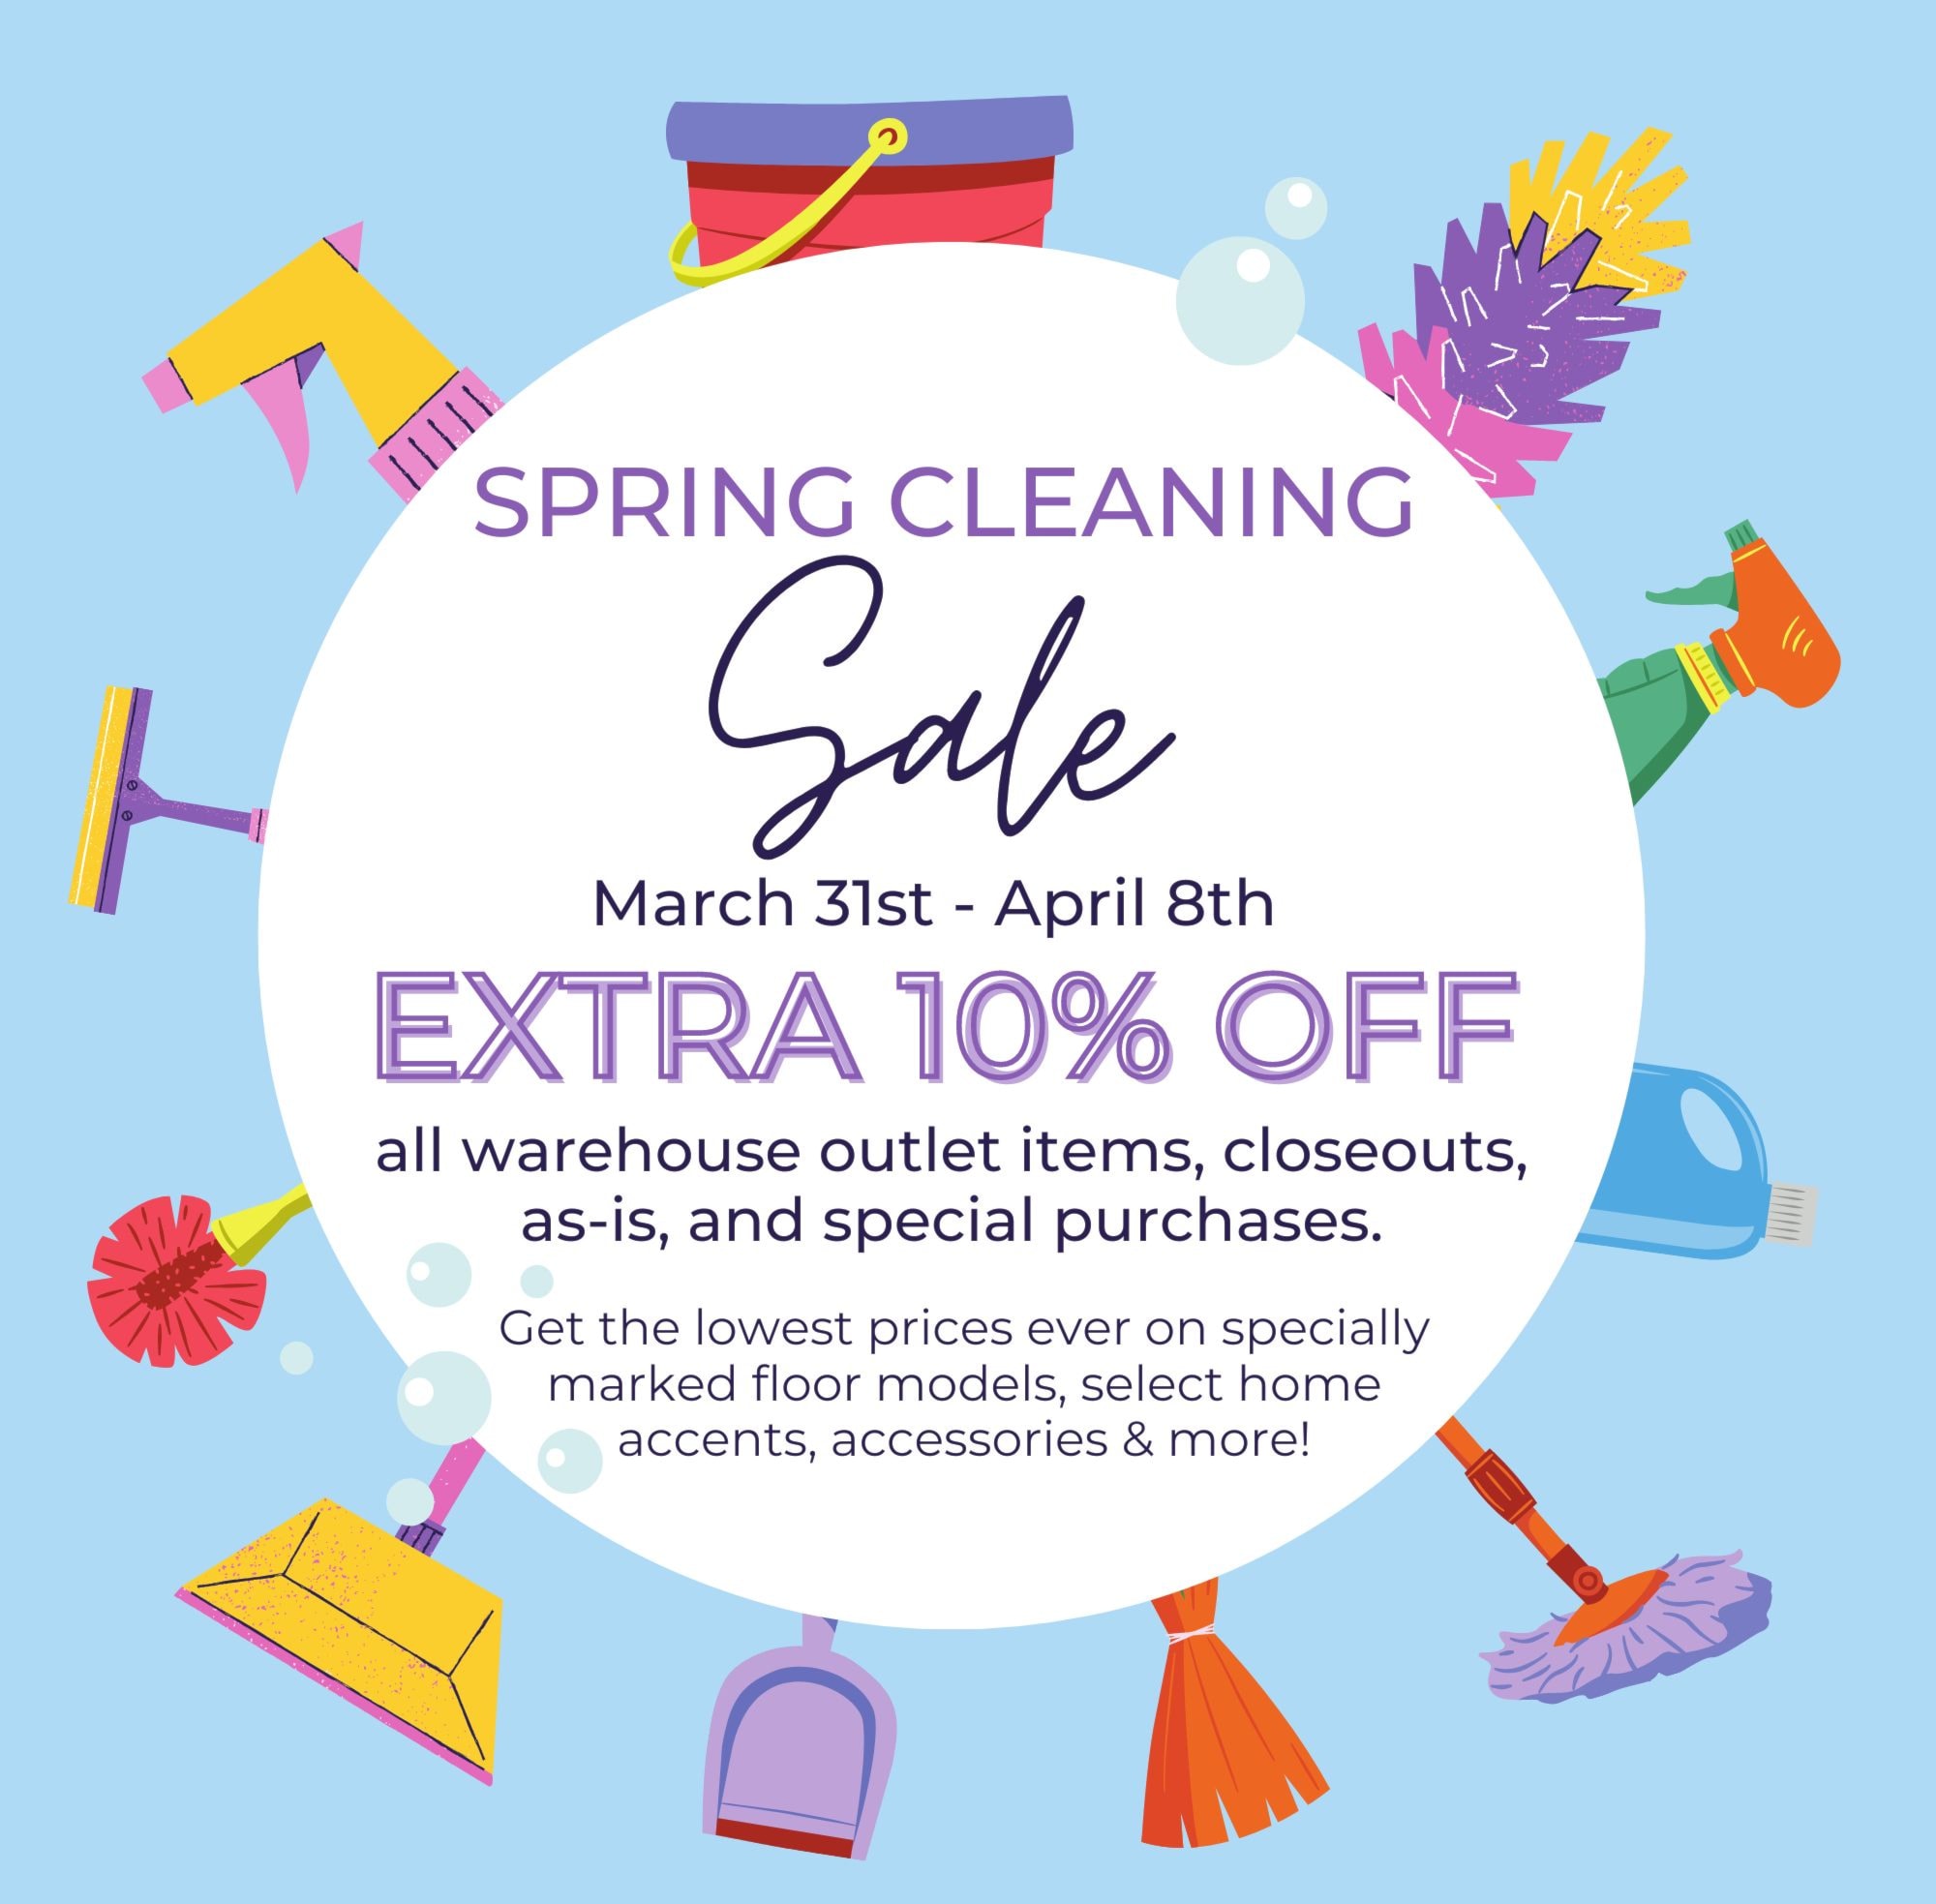 Spring Cleaning Sale. March 31st - April 8th, 2023.